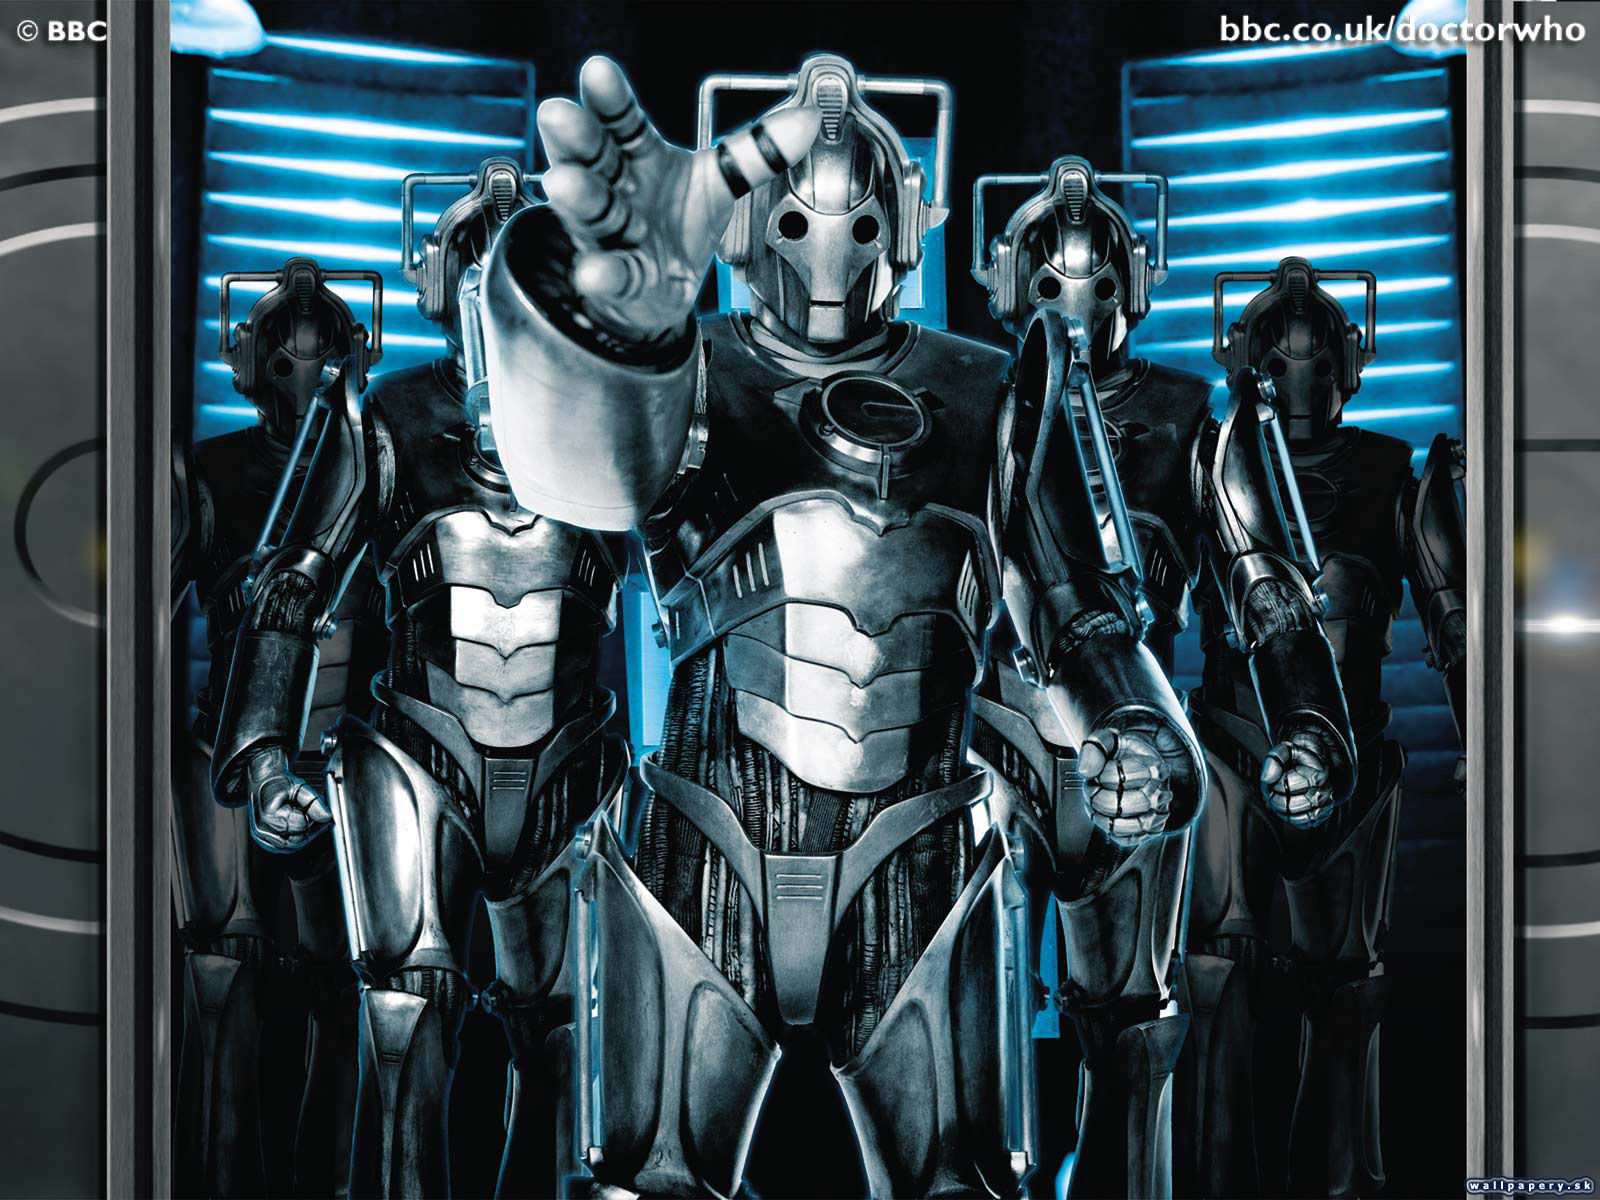 Doctor Who: The Adventure Games - Blood of the Cybermen - wallpaper 6